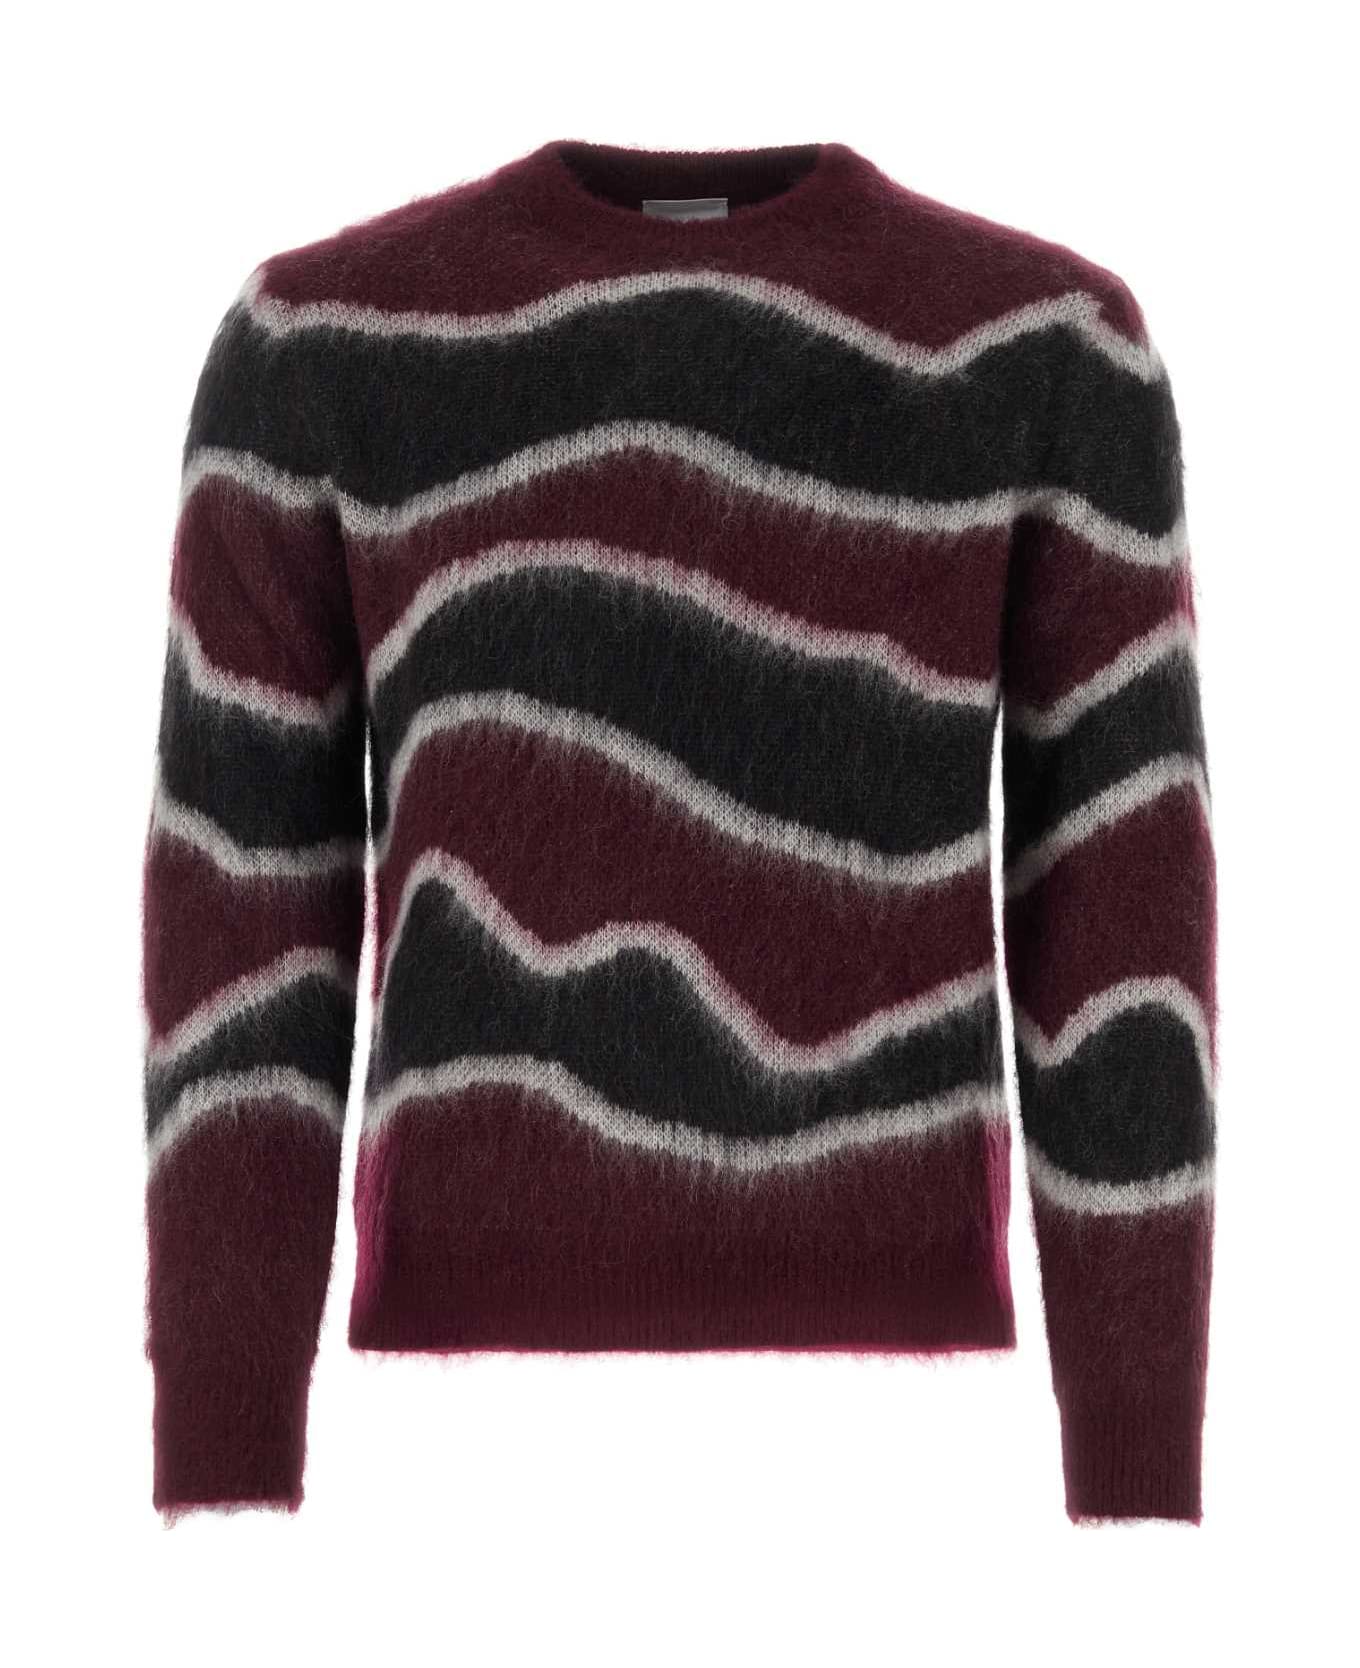 PT Torino Embroidered Mohair Blend Sweater - 0780